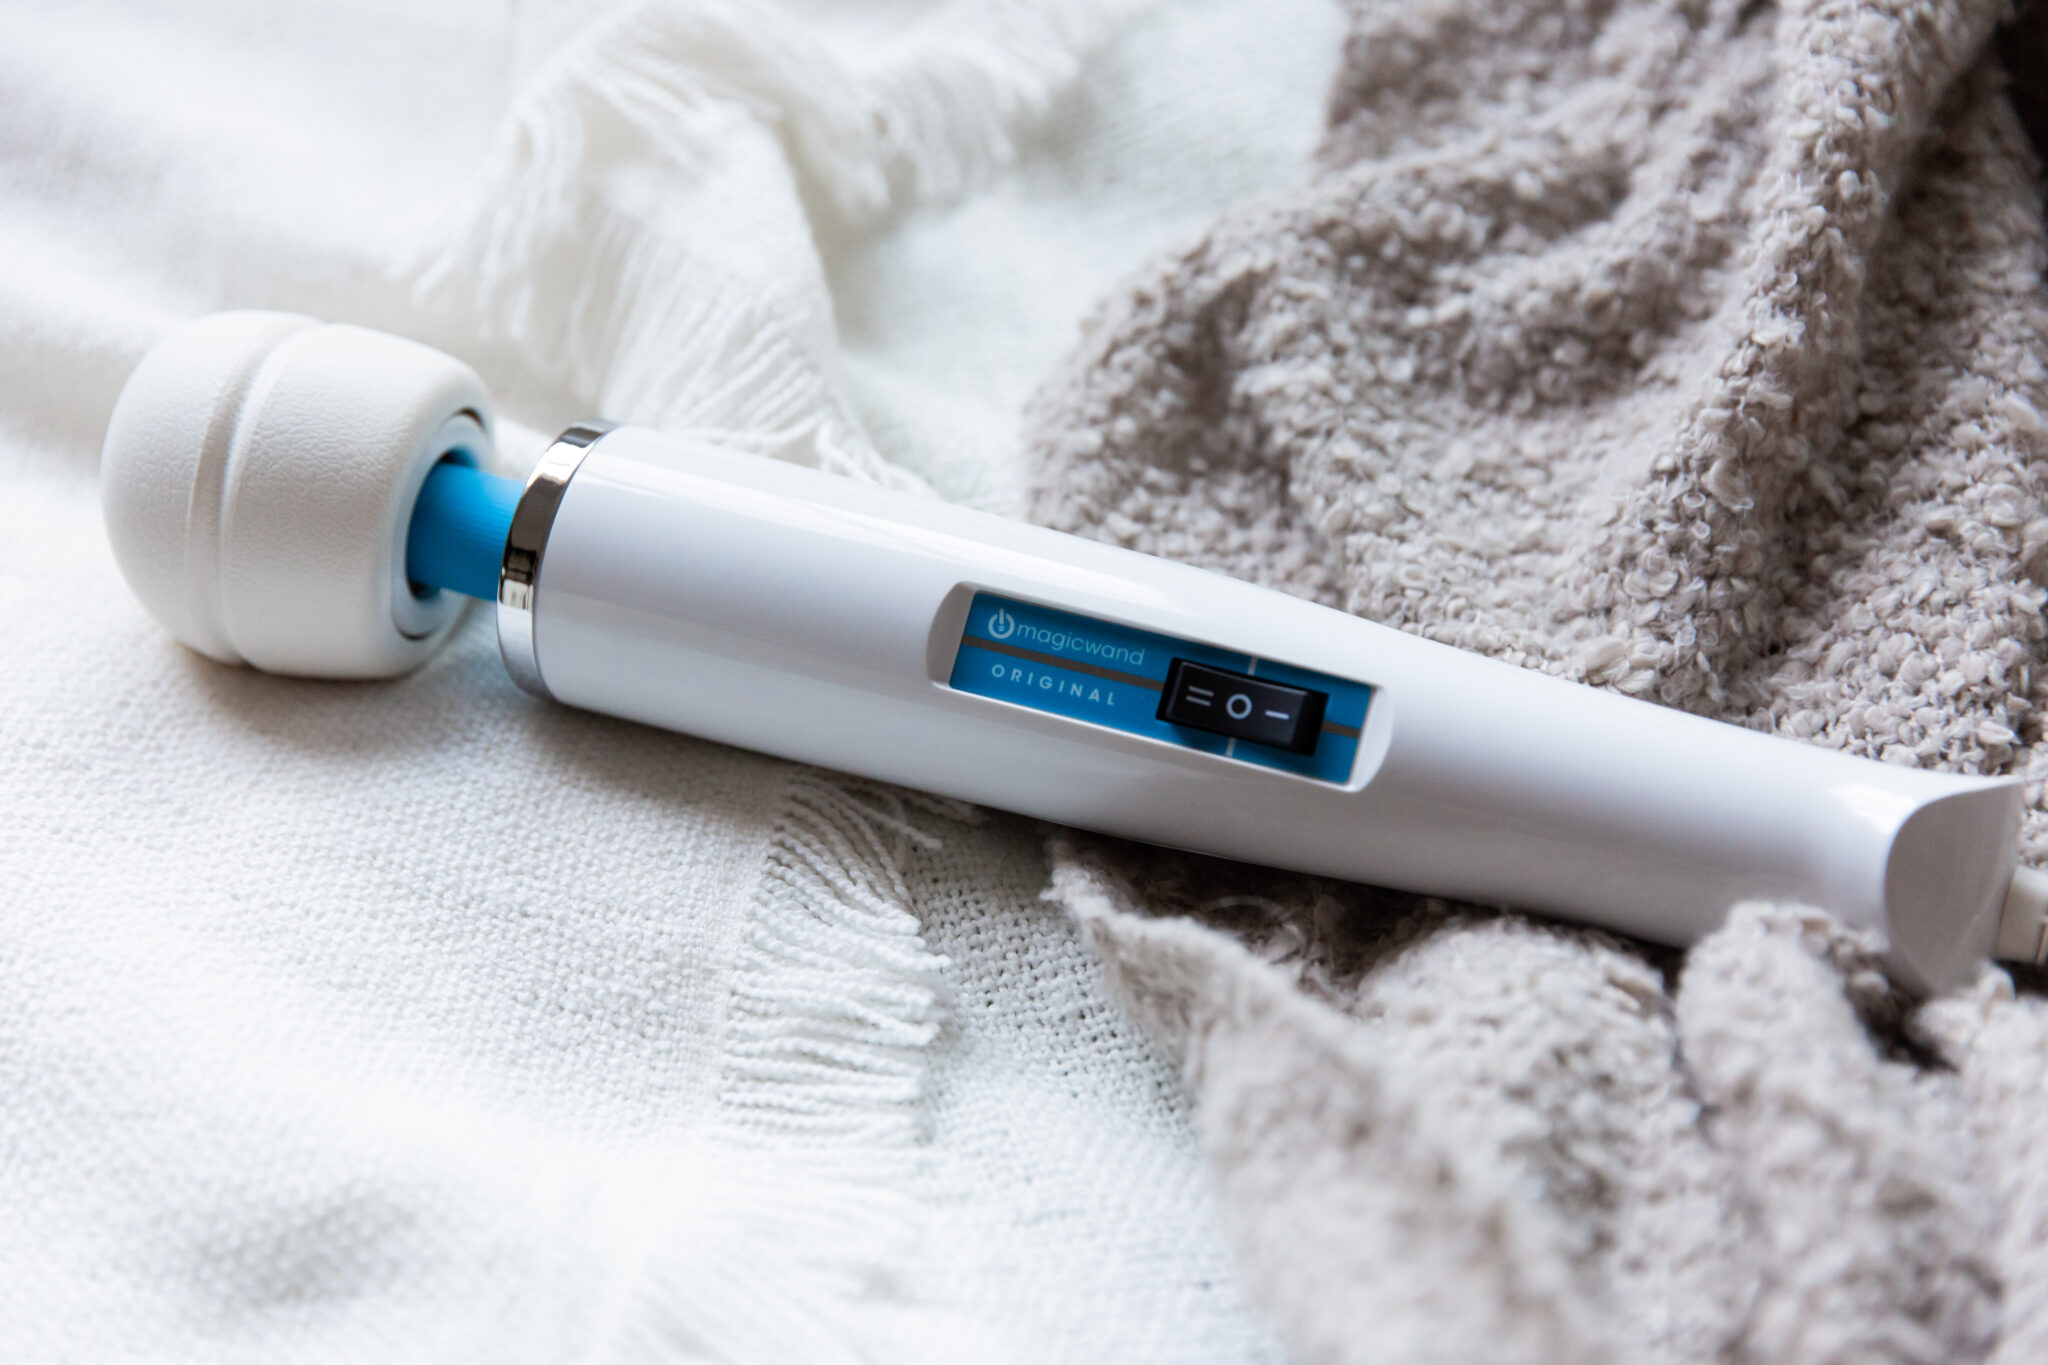 A full image of the vibrator, showing its white body, blue accents, and rounded head.